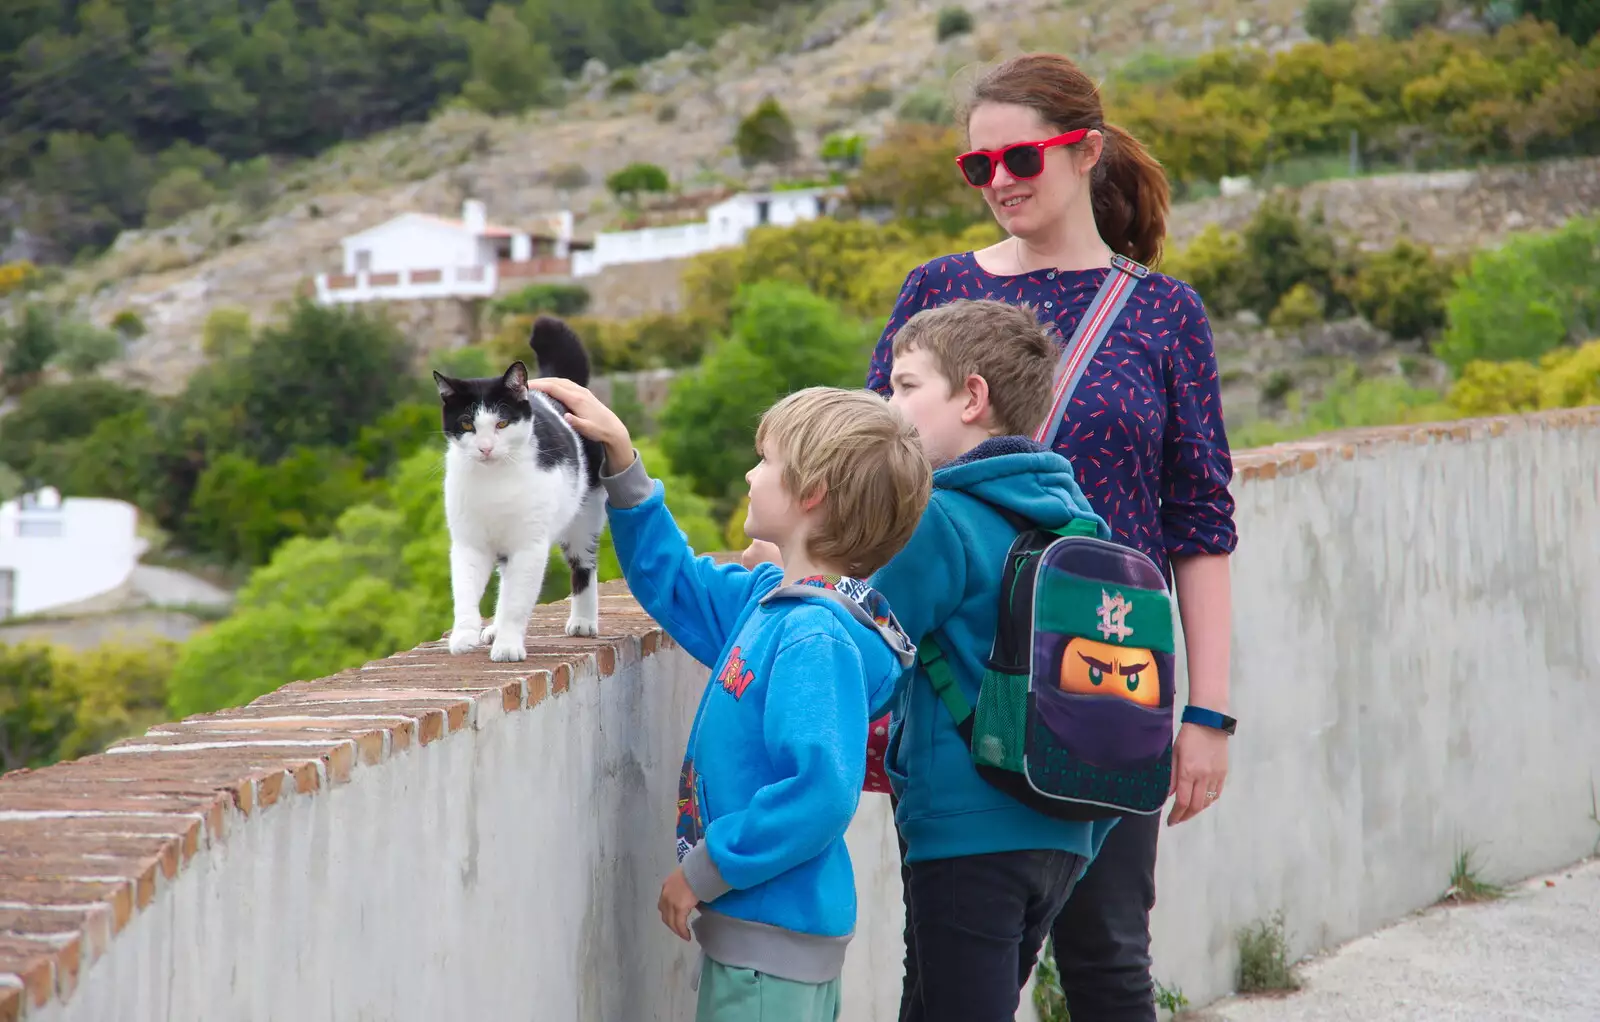 The boys find another cat, from The Caves of Nerja, and Frigiliana, Andalusia, Spain - 18th April 2019